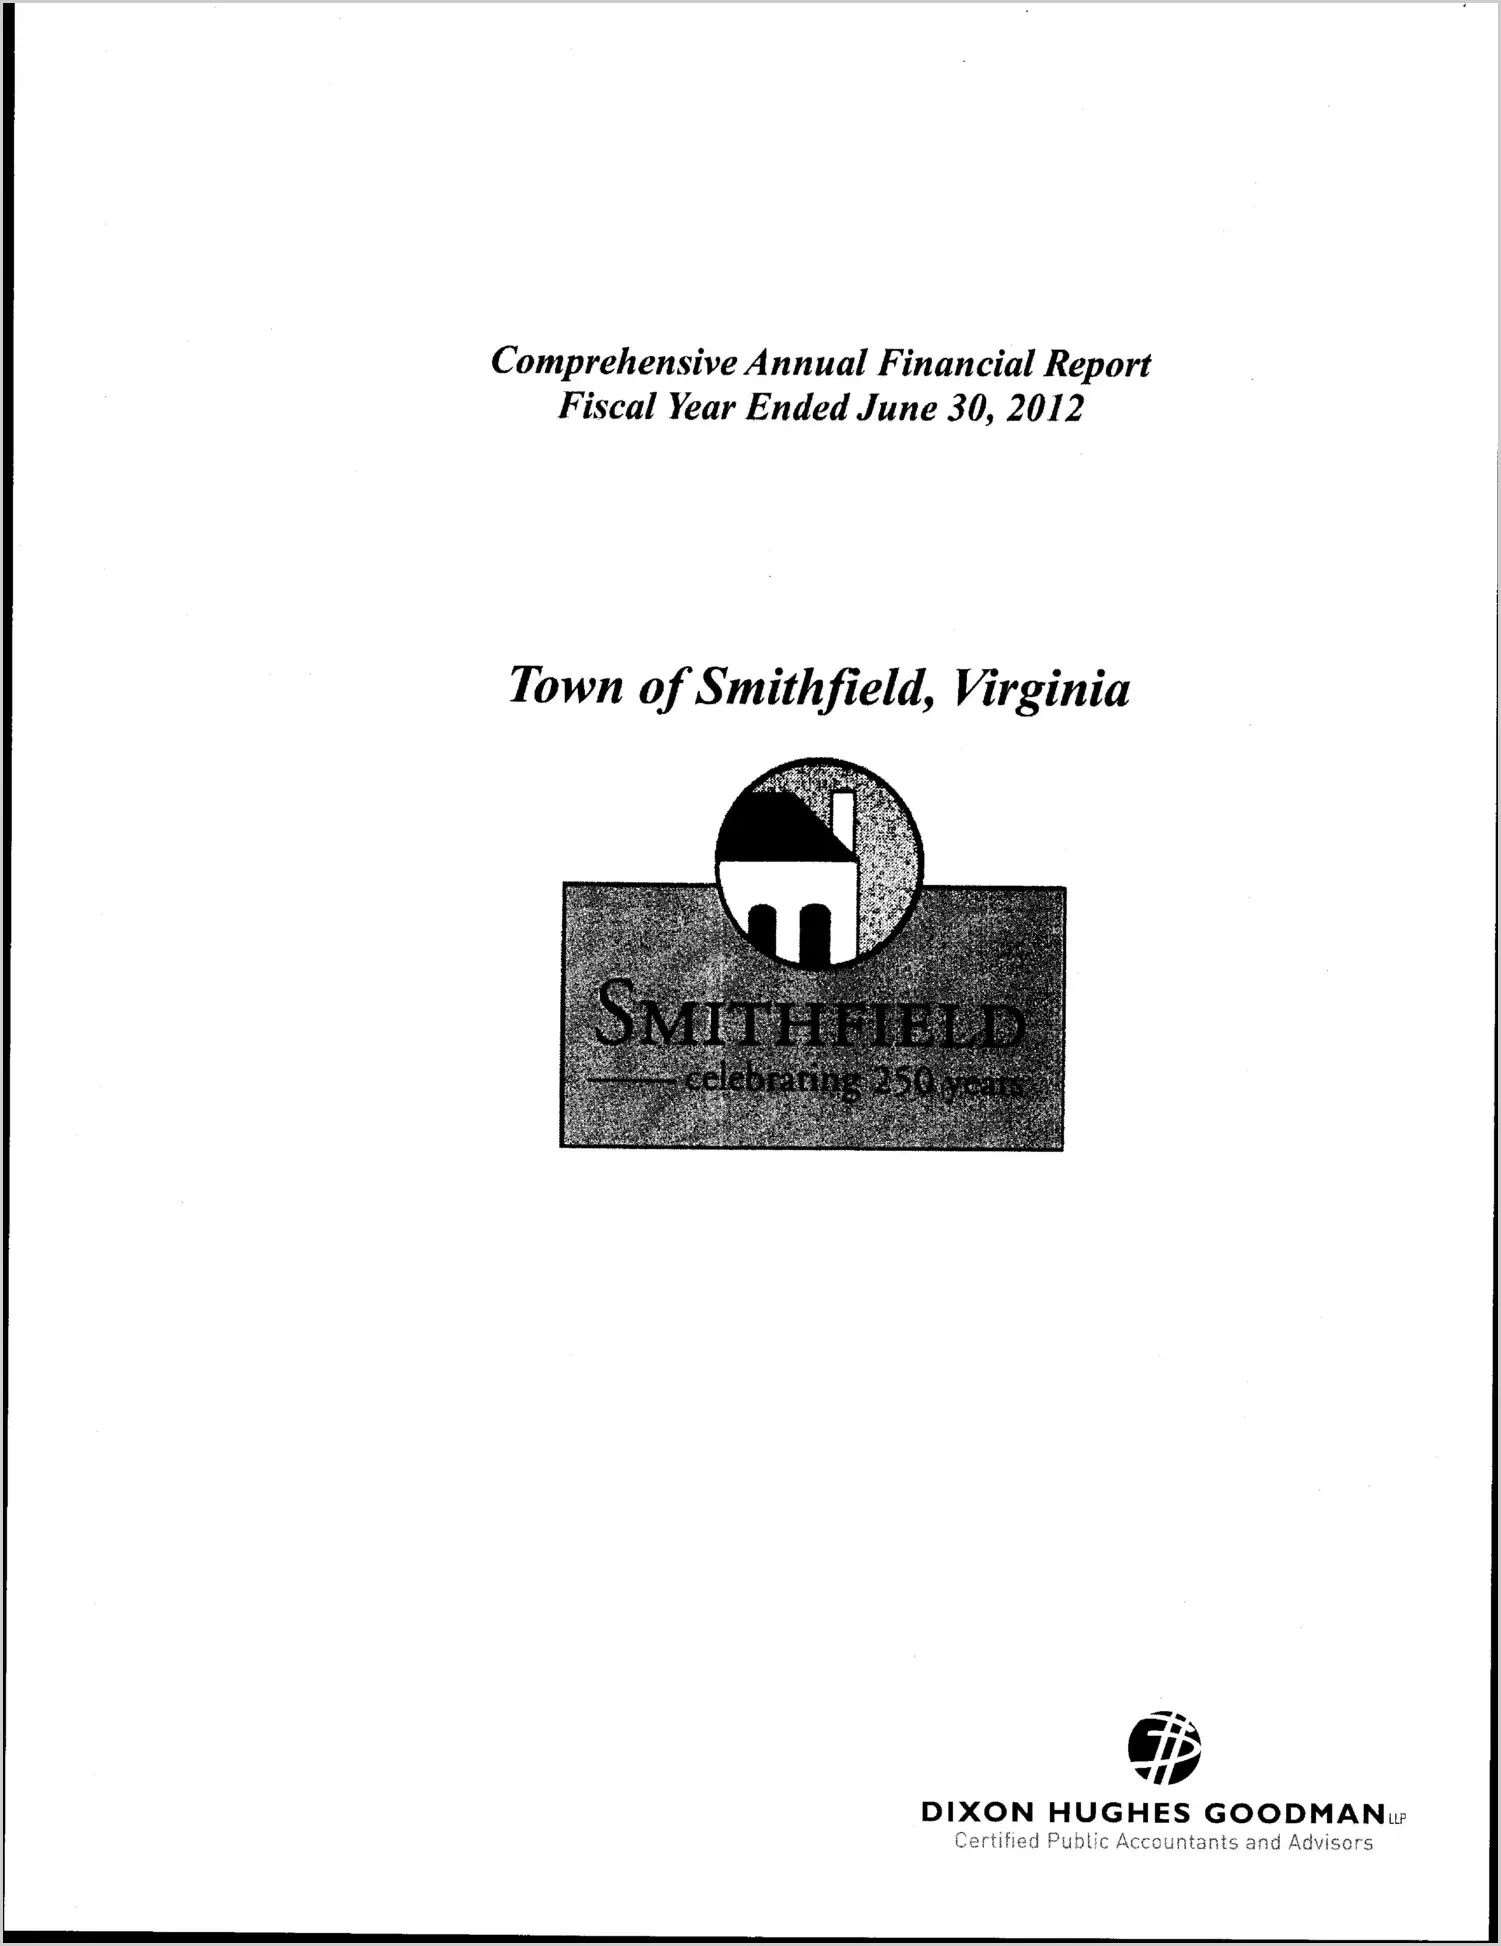 2012 Annual Financial Report for Town of Smithfield